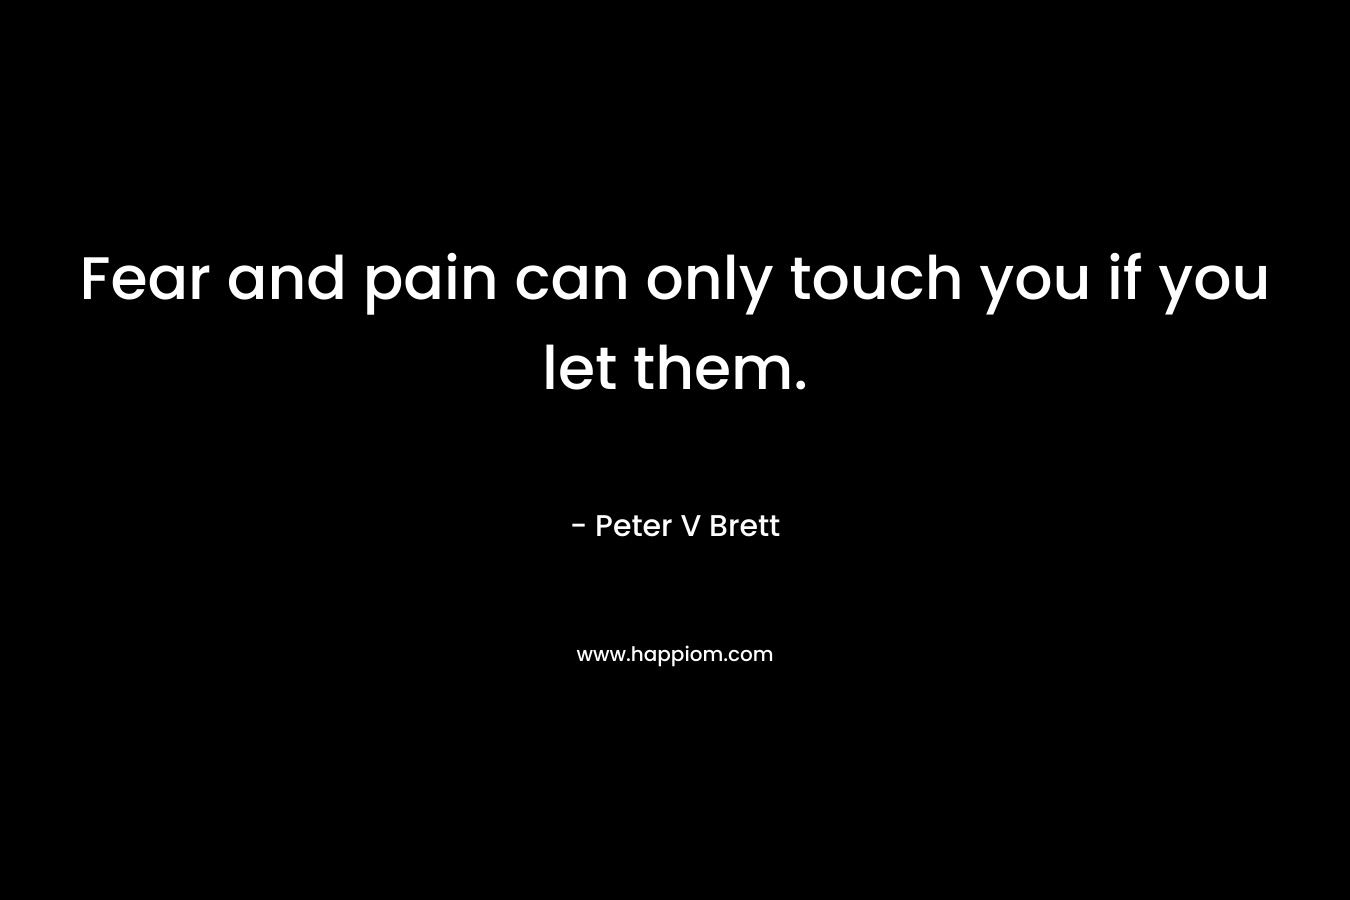 Fear and pain can only touch you if you let them. – Peter V Brett